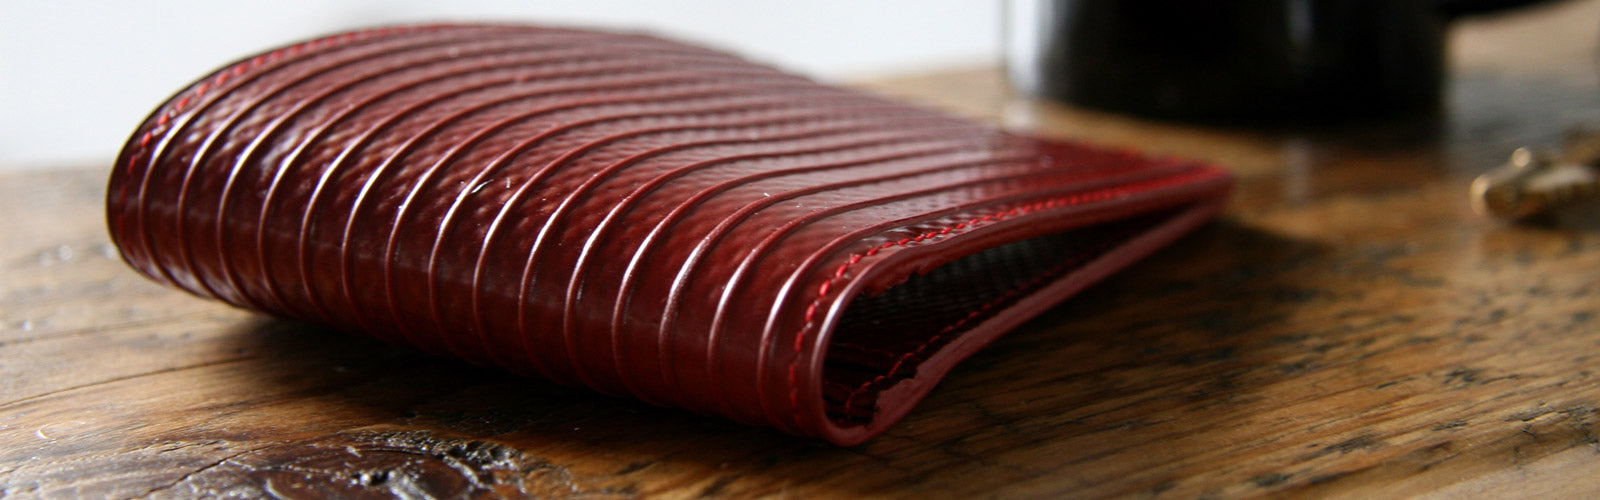 Firefighter Wallet handmade from recycled fire-hose